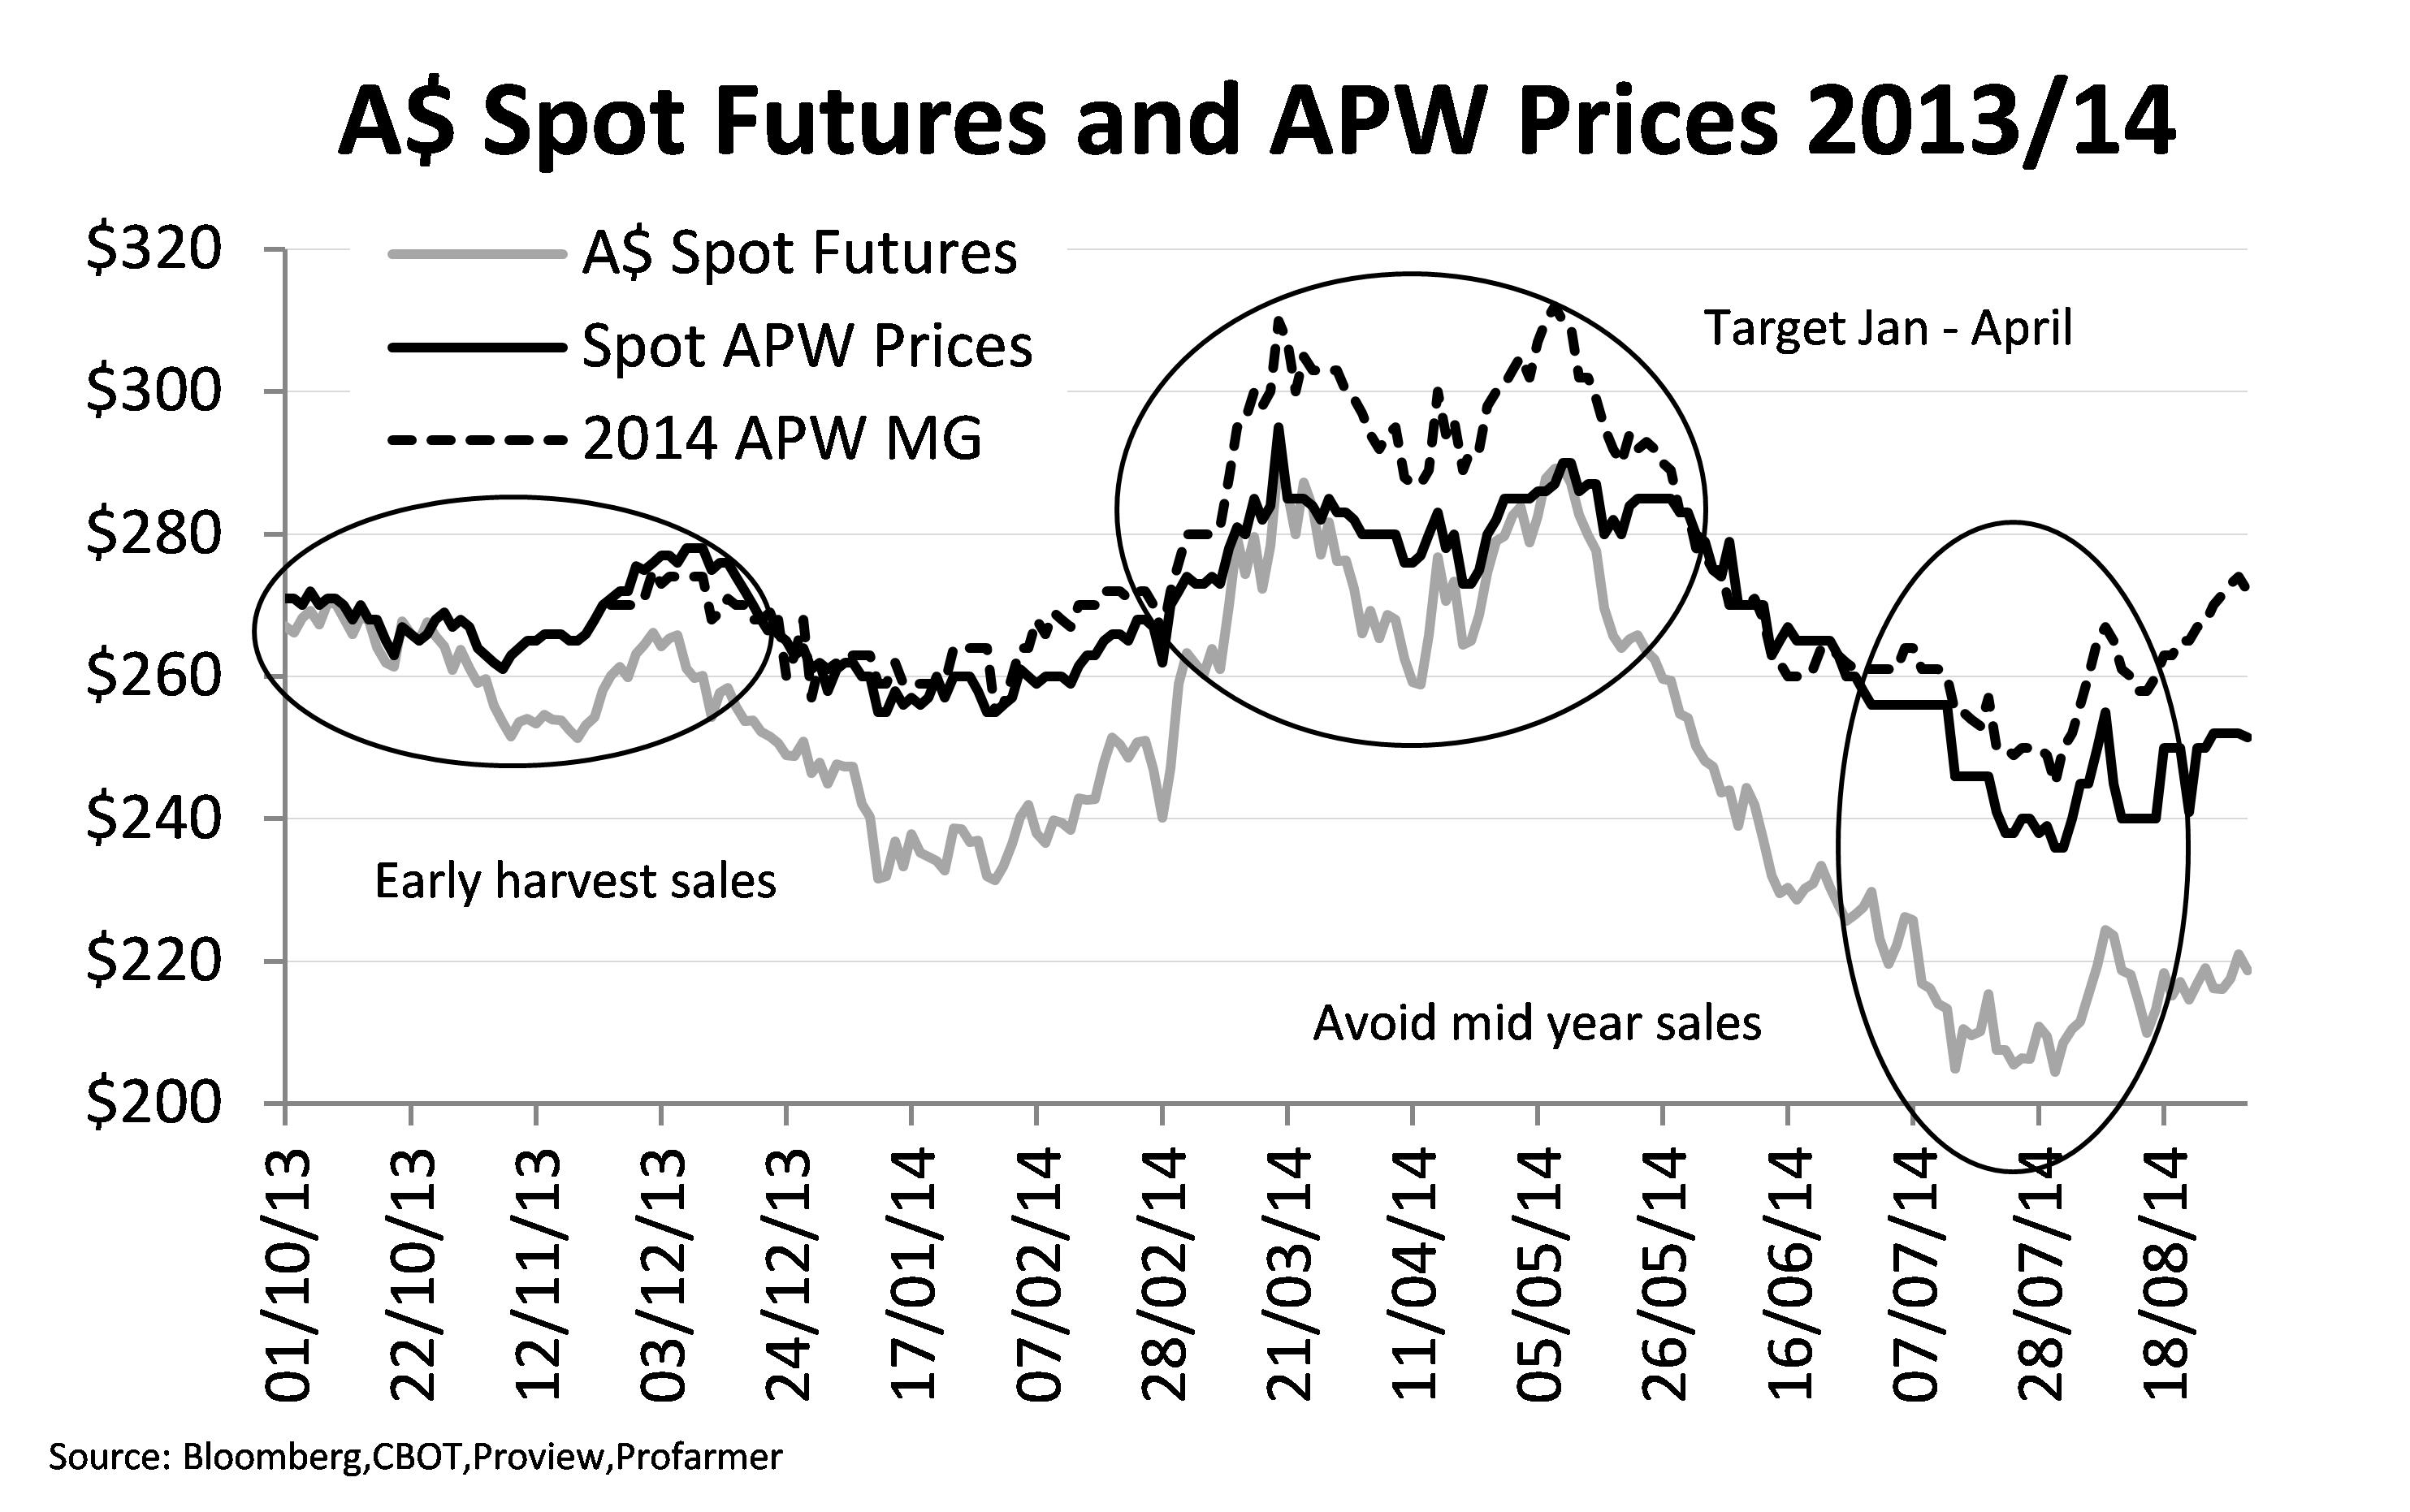 Figure 1. A$ spot futures and APW prices 2013/14. 